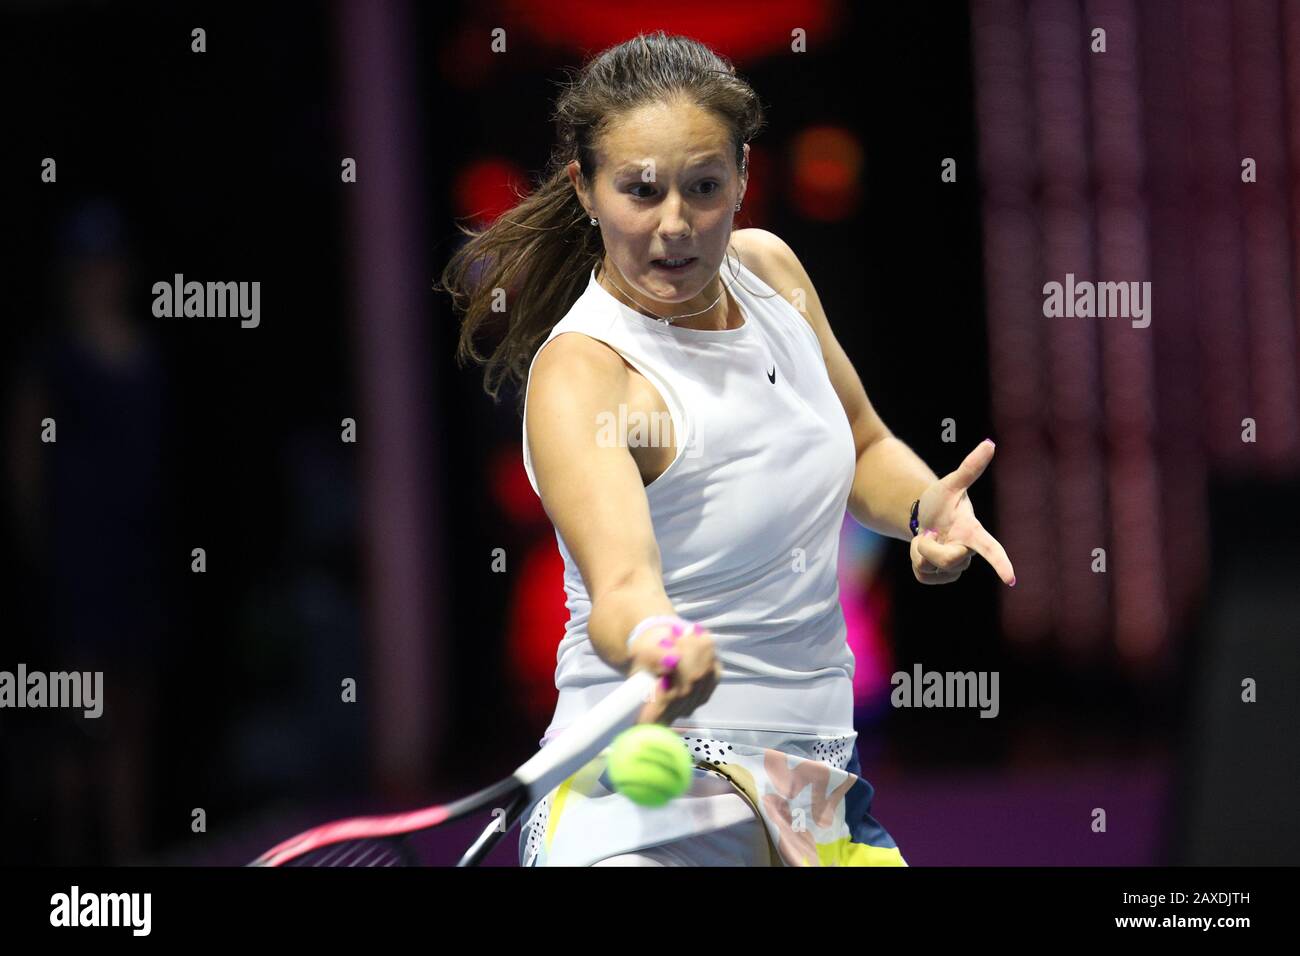 Daria Kasatkina of Russia in action against Ekaterina Alexandrova of Russia during the St.Petersburg Ladies Trophy 2020 tennis tournament at Sibur Arena.Final score (Daria Kasatkina 1-2 Ekaterina Alexandrova Stock Photo